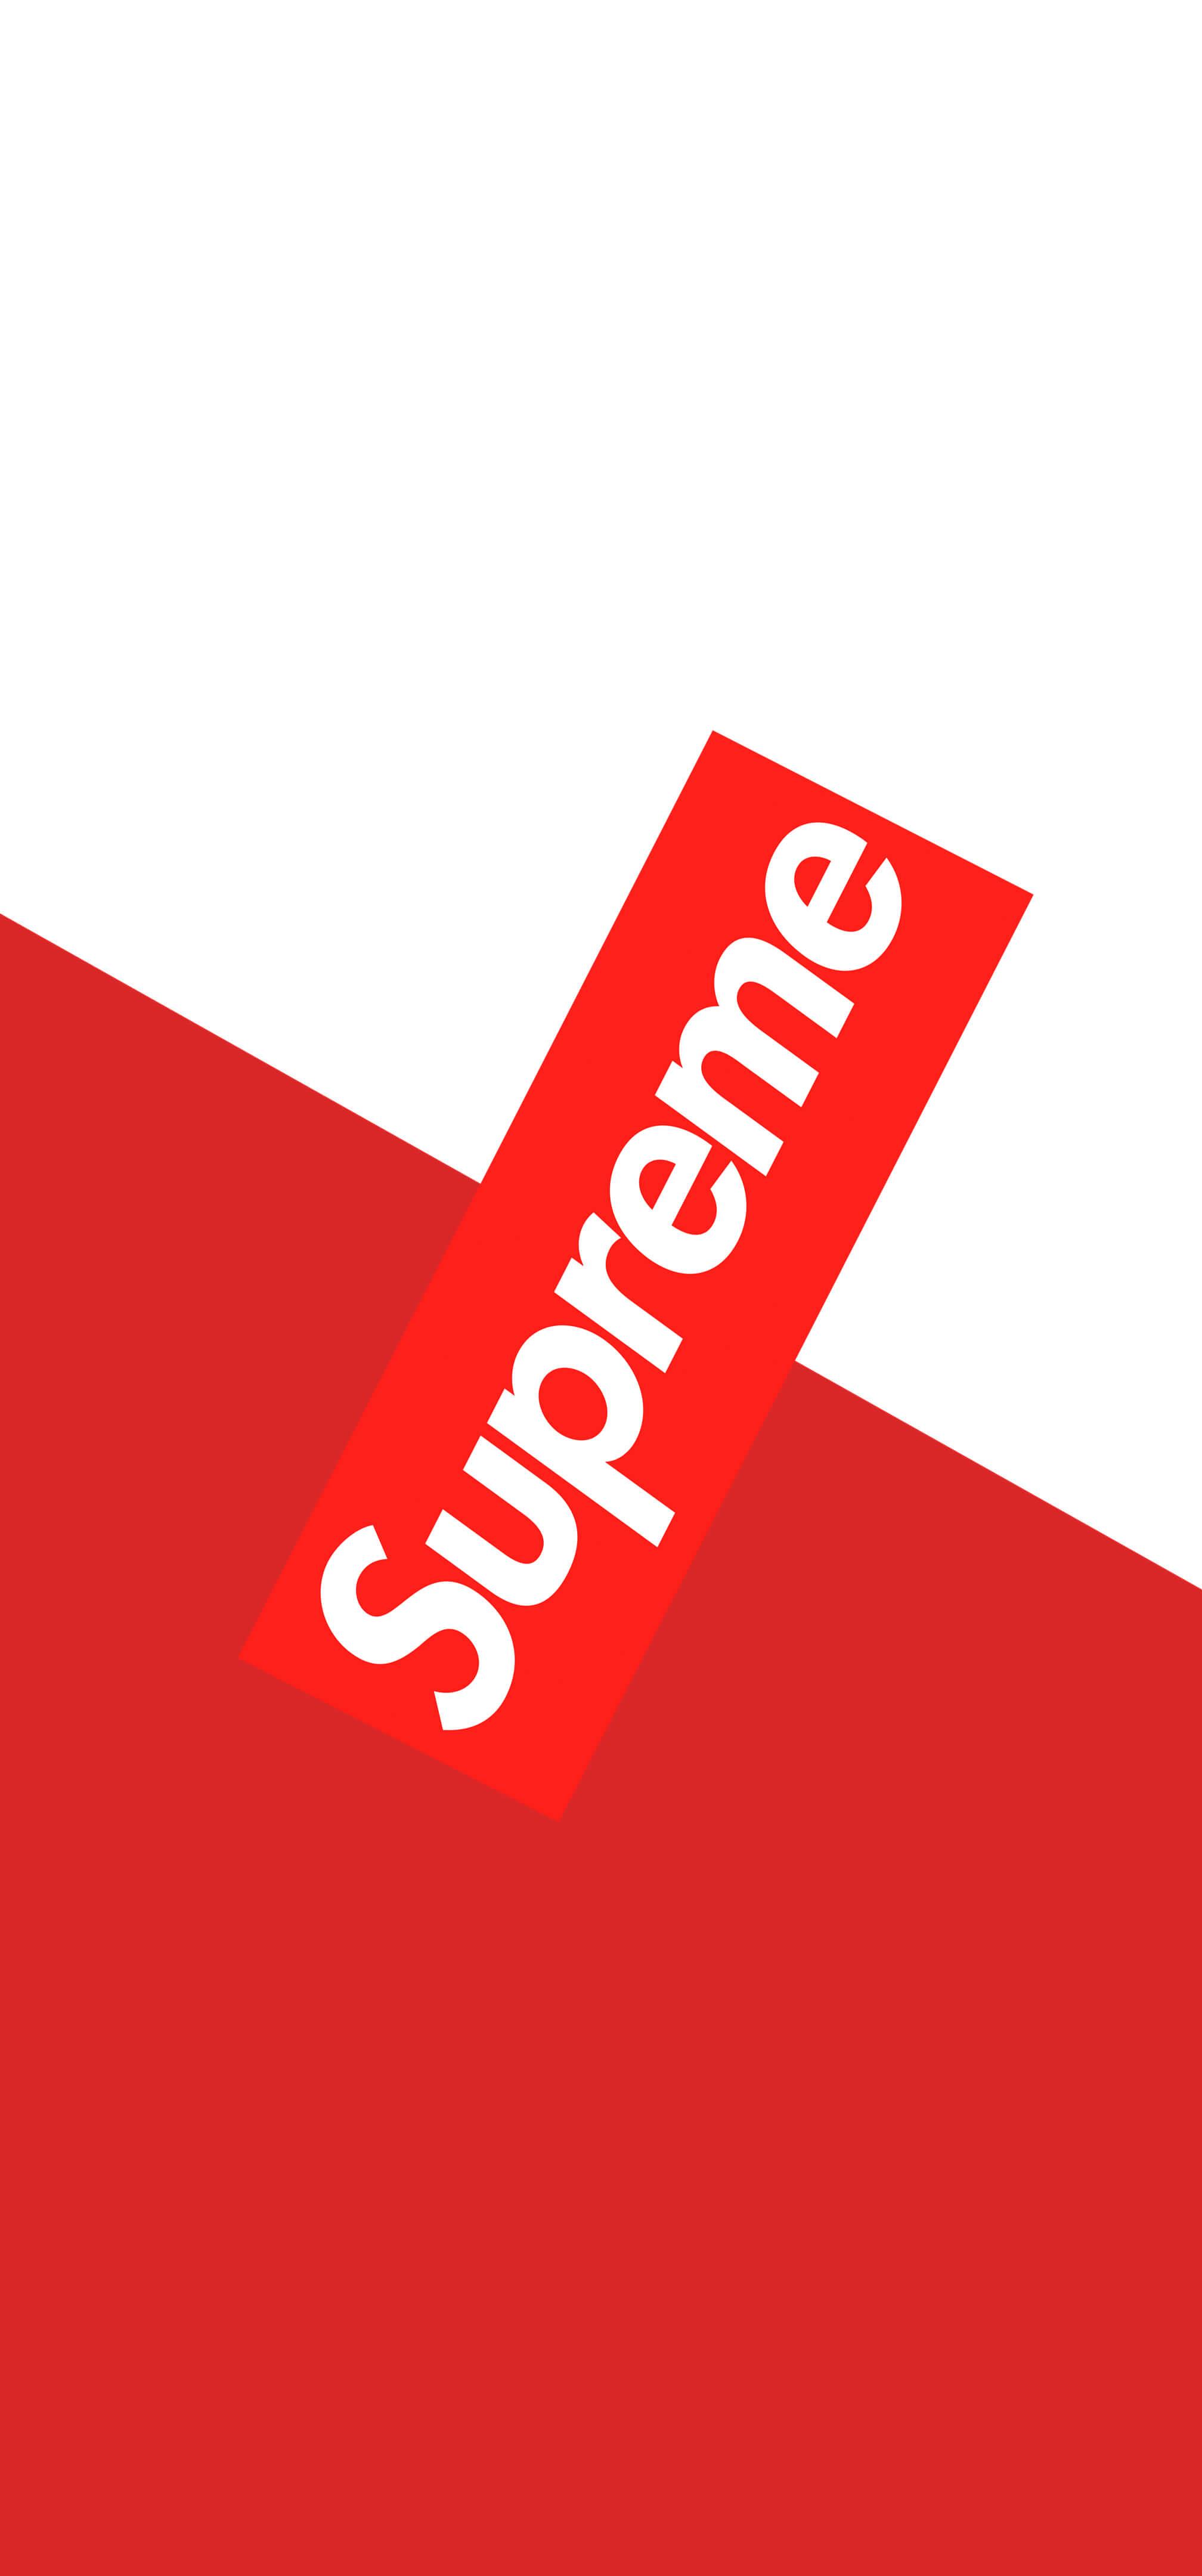 Supreme White Iphone Wallpapers Top Free Supreme White Iphone Backgrounds Wallpaperaccess